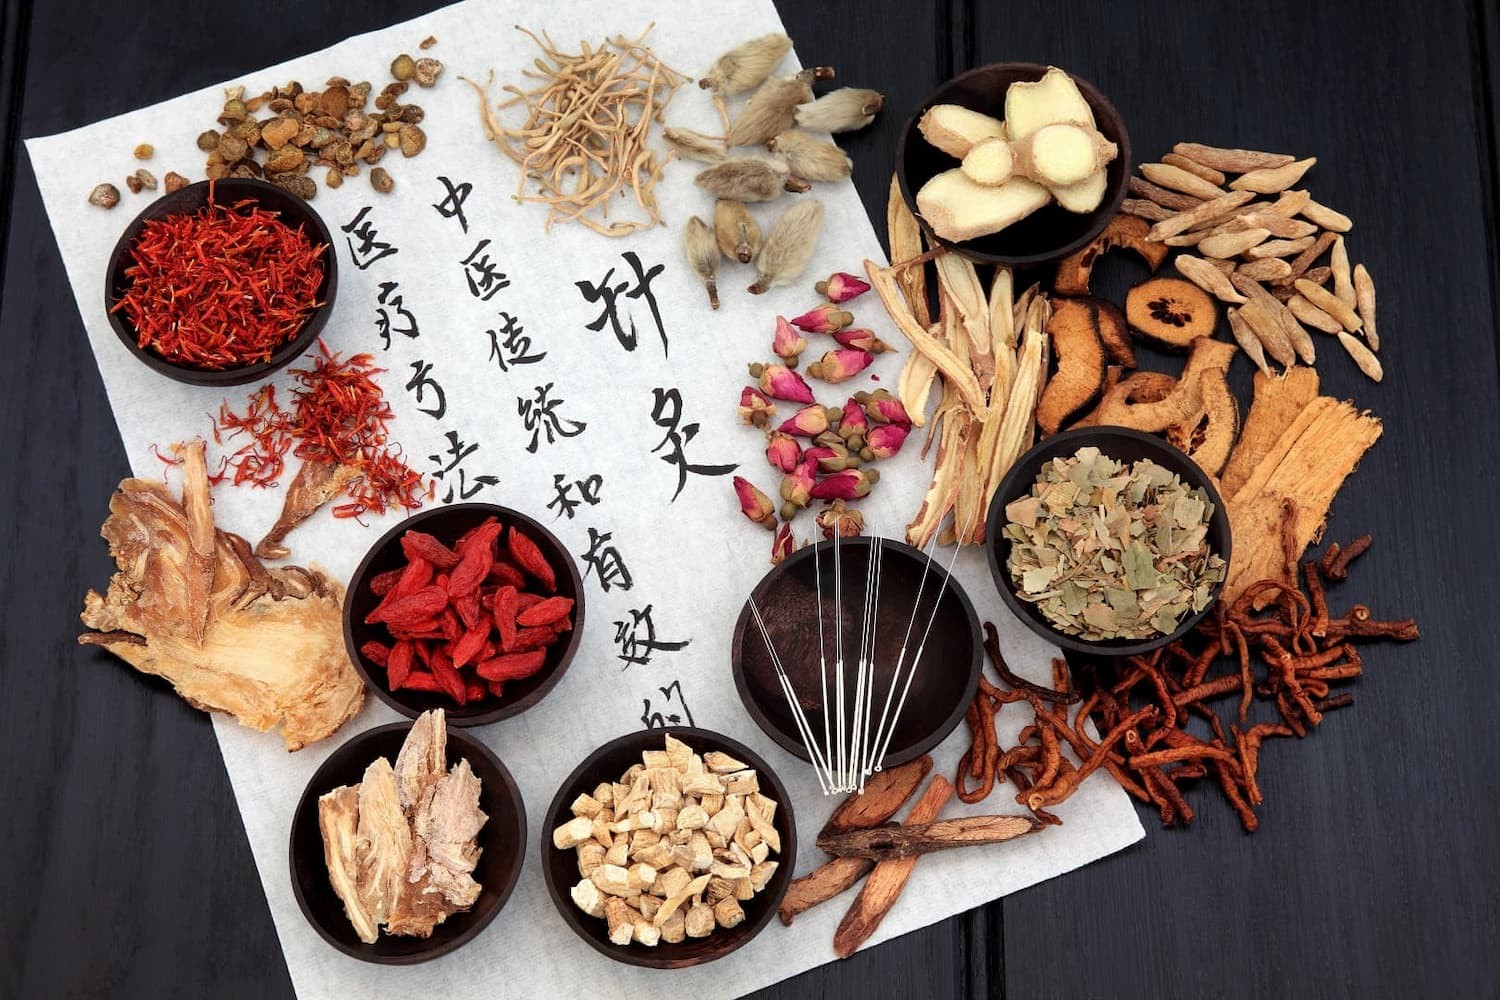 Western Medicine vs. Chinese Medicine: Which is Better?